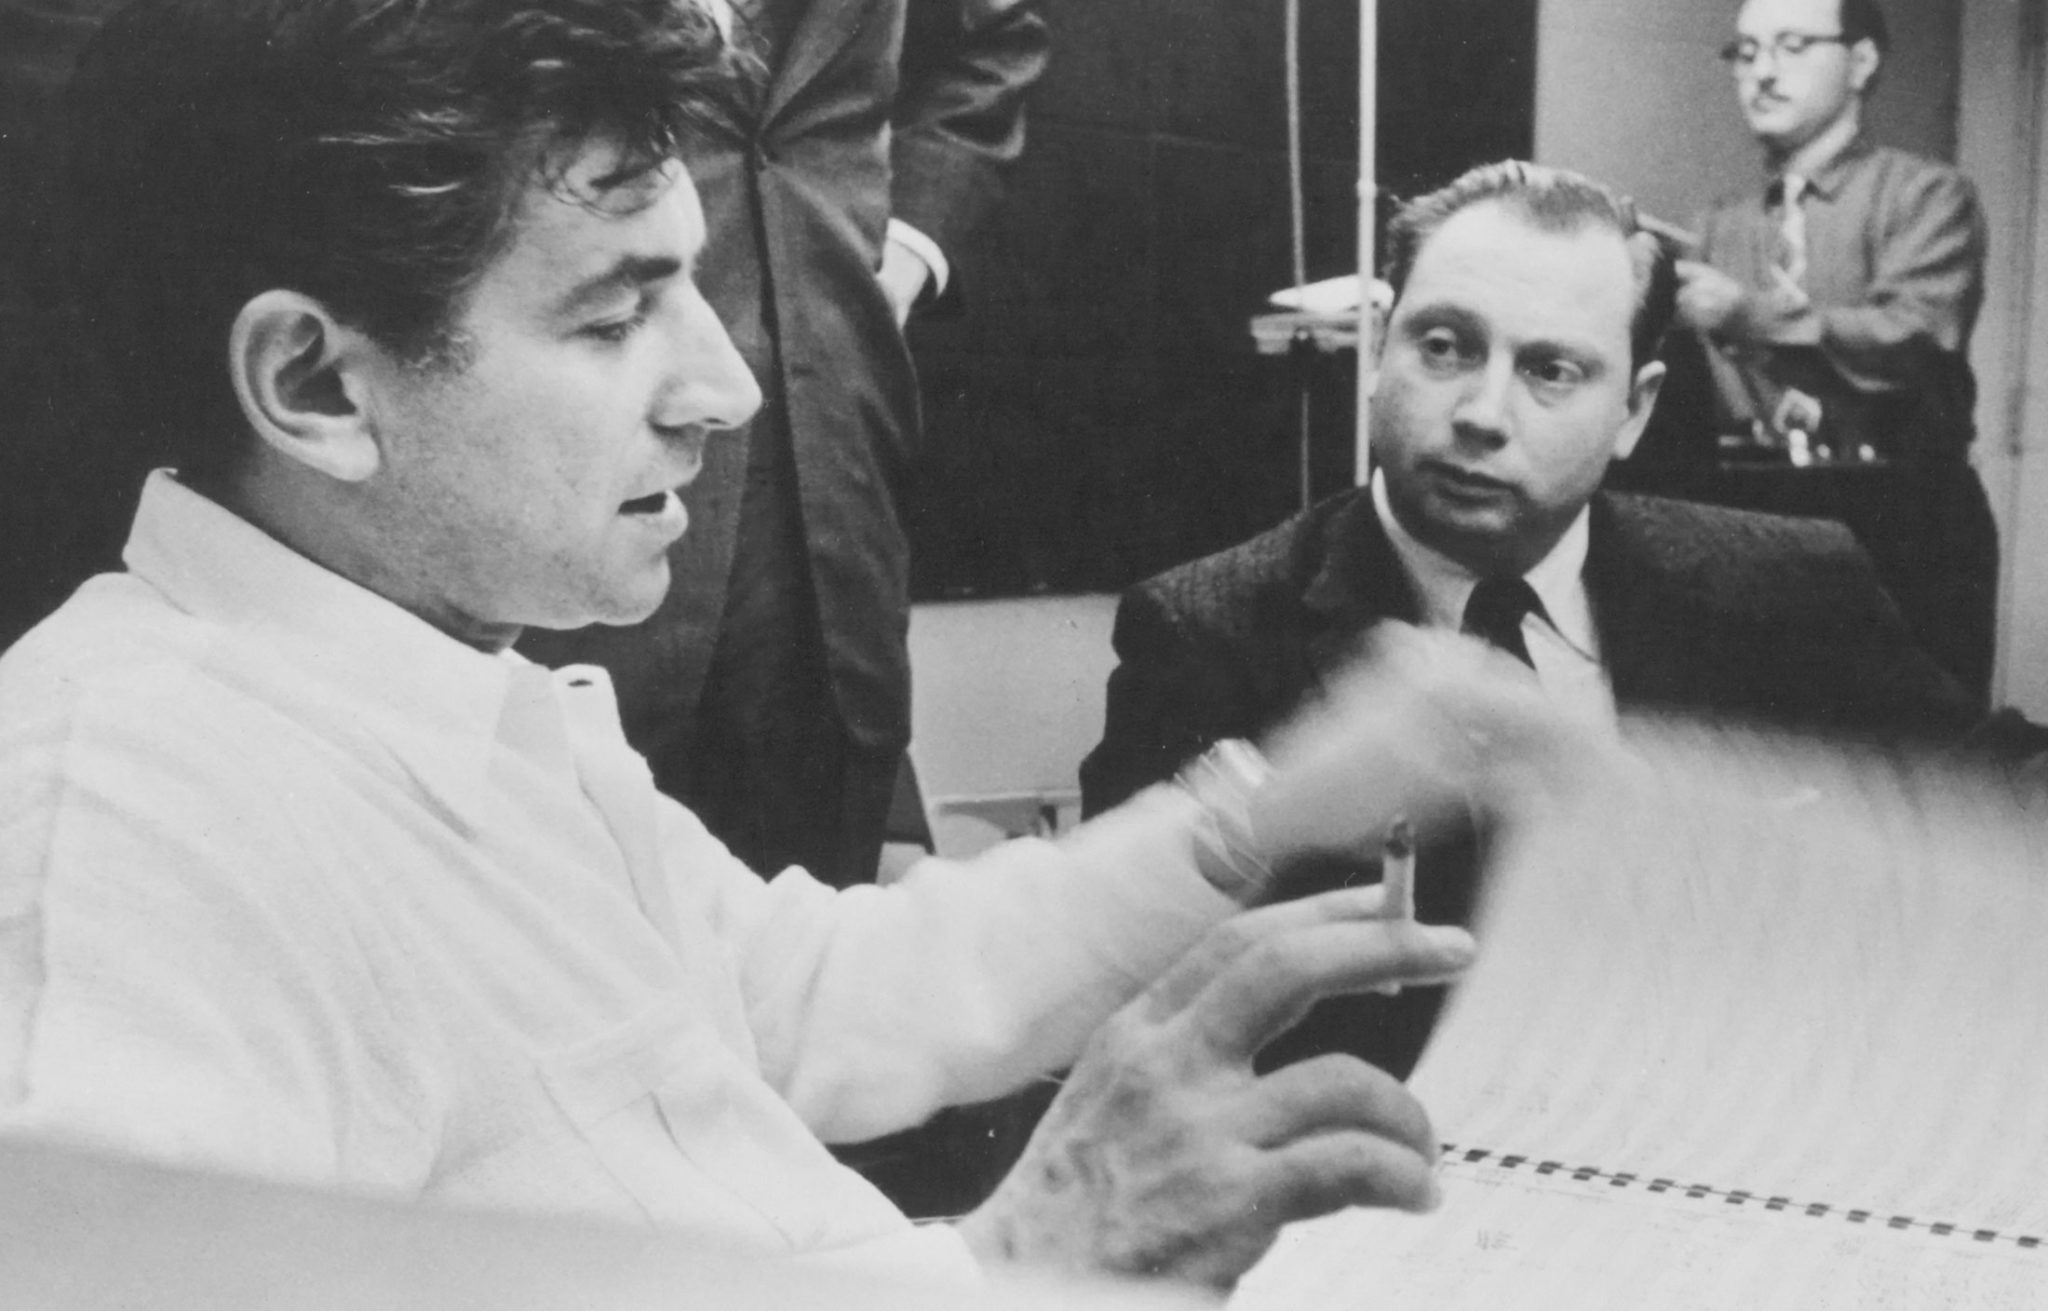 Leonard Bernstein and violinist Isaac Stern at the recording session for Bernstein's "Serenade" in 1955. (Credit: Library of Congress Music Division)